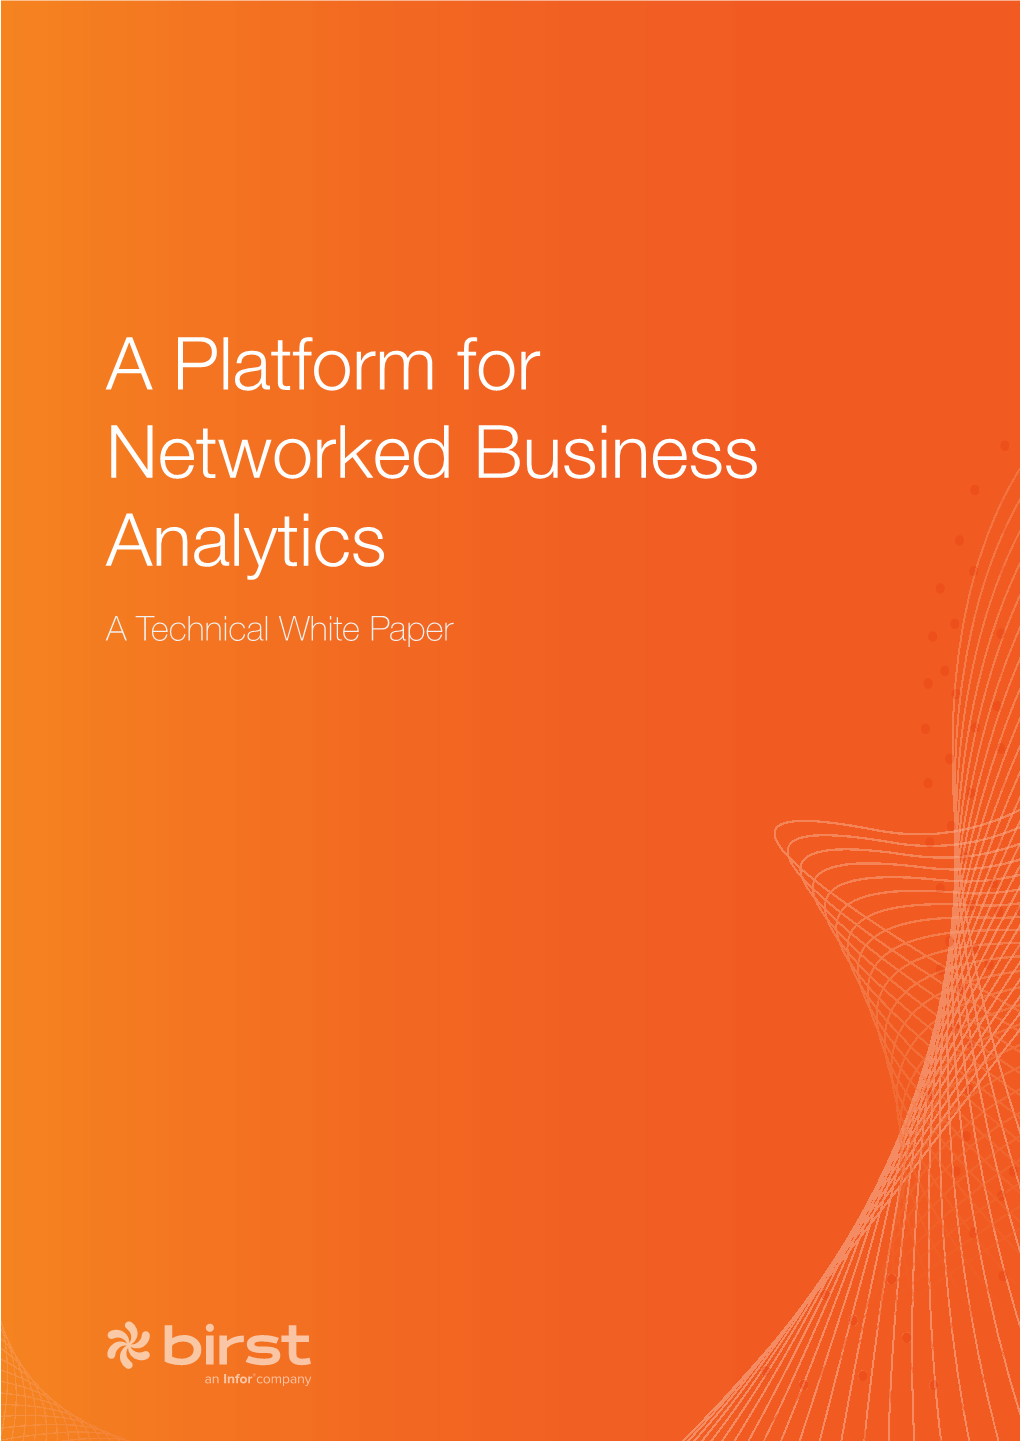 A Platform for Networked Business Analytics a Technical White Paper a Platform for Networked Business Analytics 2